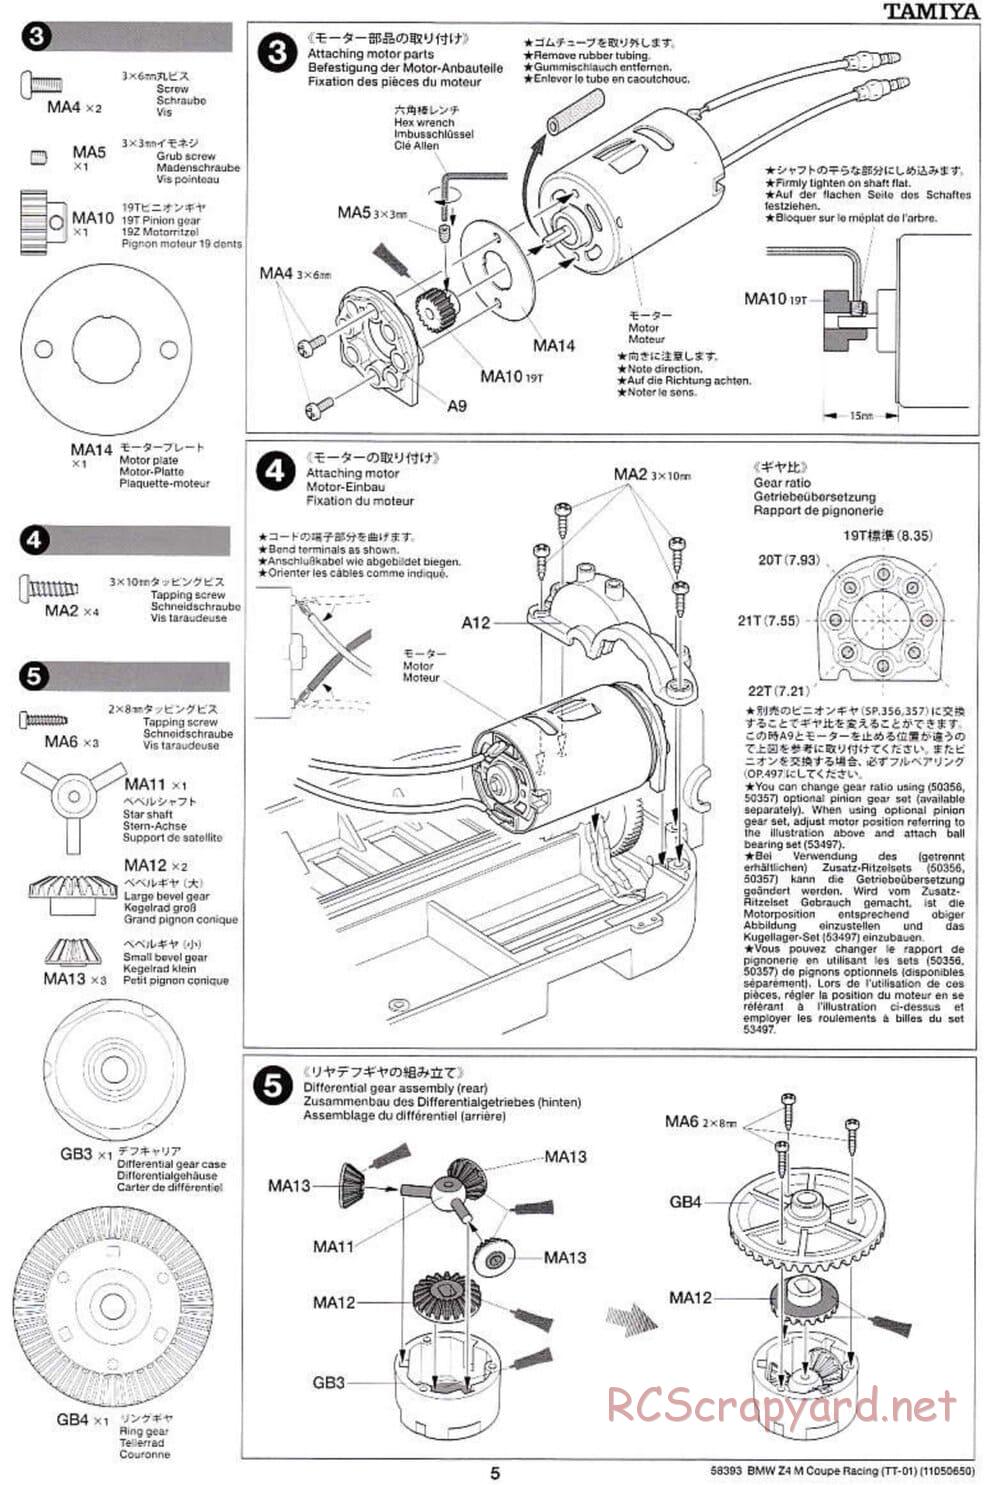 Tamiya - BMW Z4 M Coupe Racing - TT-01 Chassis - Manual - Page 5